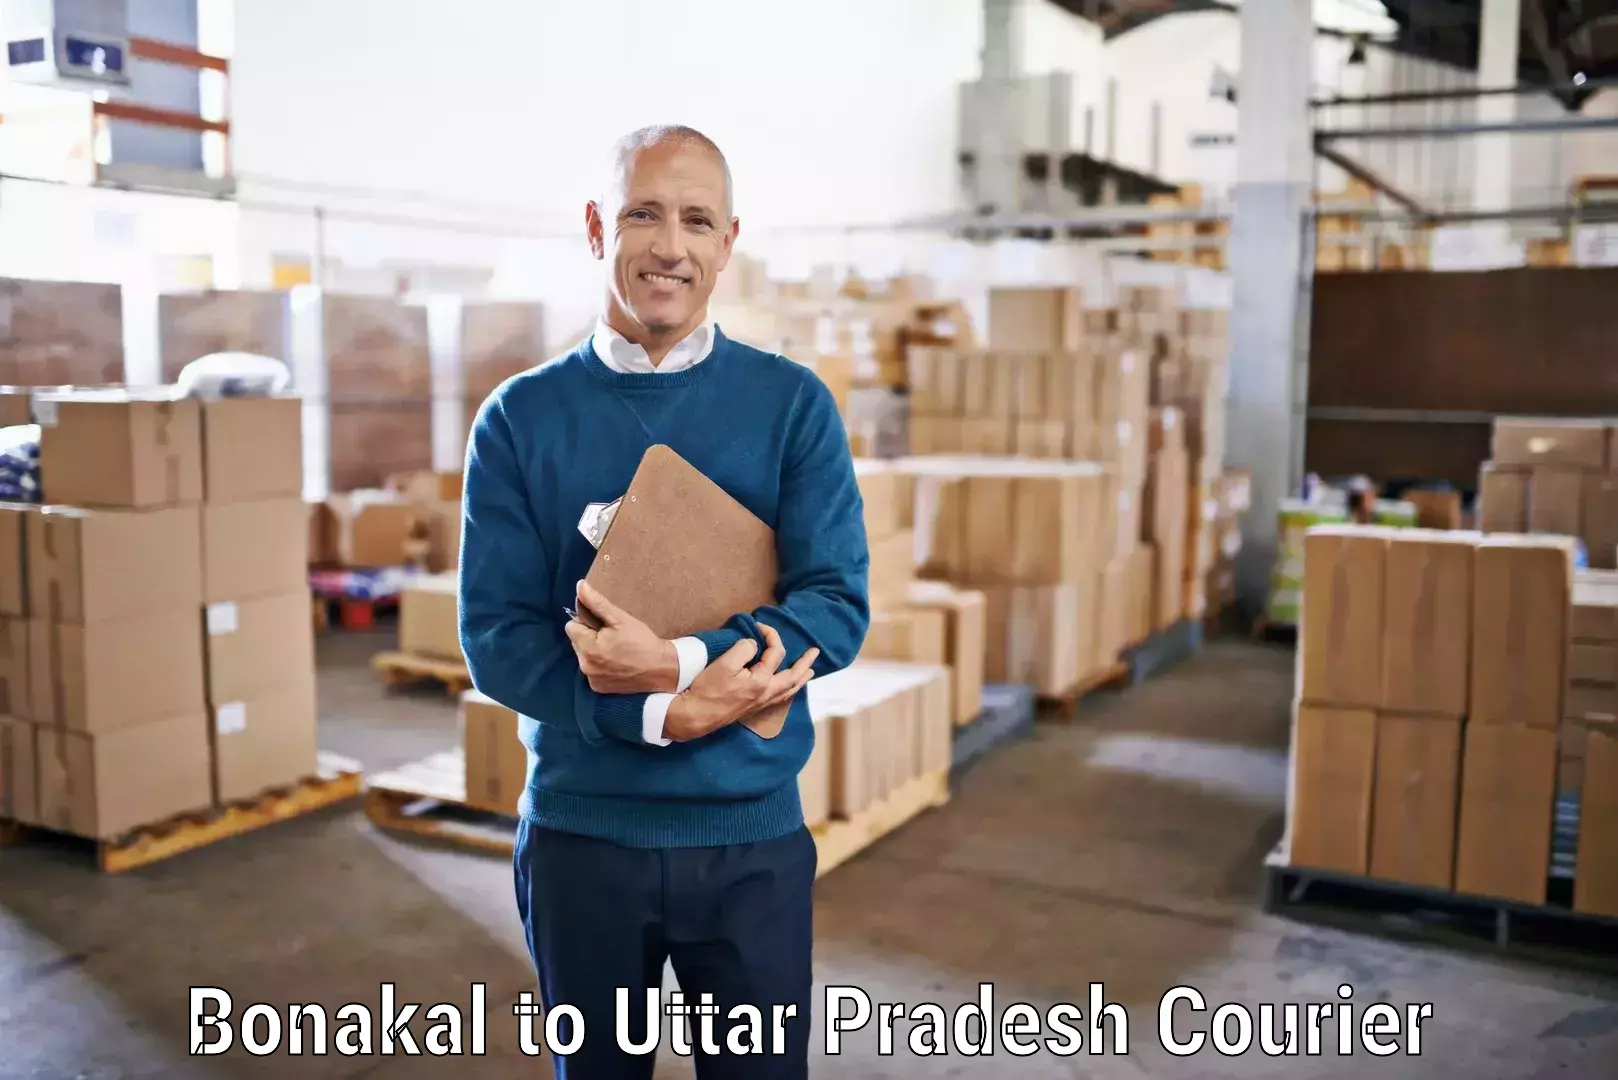 Premium courier solutions Bonakal to Dhaurahara